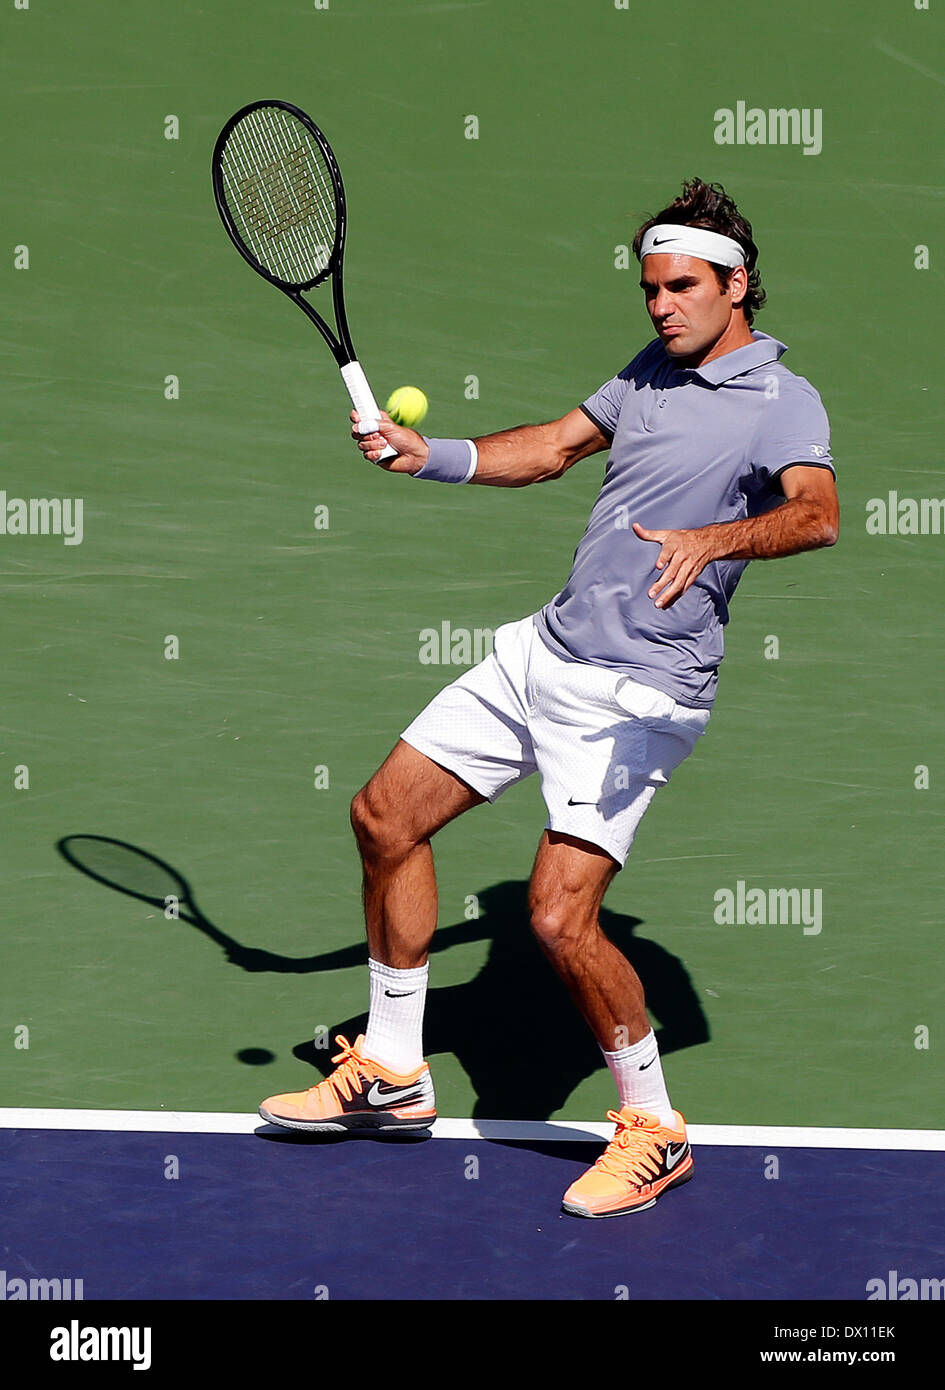 15 March, 2014: Roger Federer of Switzerland hits a return to Alexandr  Dolgopolov of the Ukraine during the BNP Paribas Open mens singles  semi-finals at Indian Wells Tennis Garden in Indian Wells